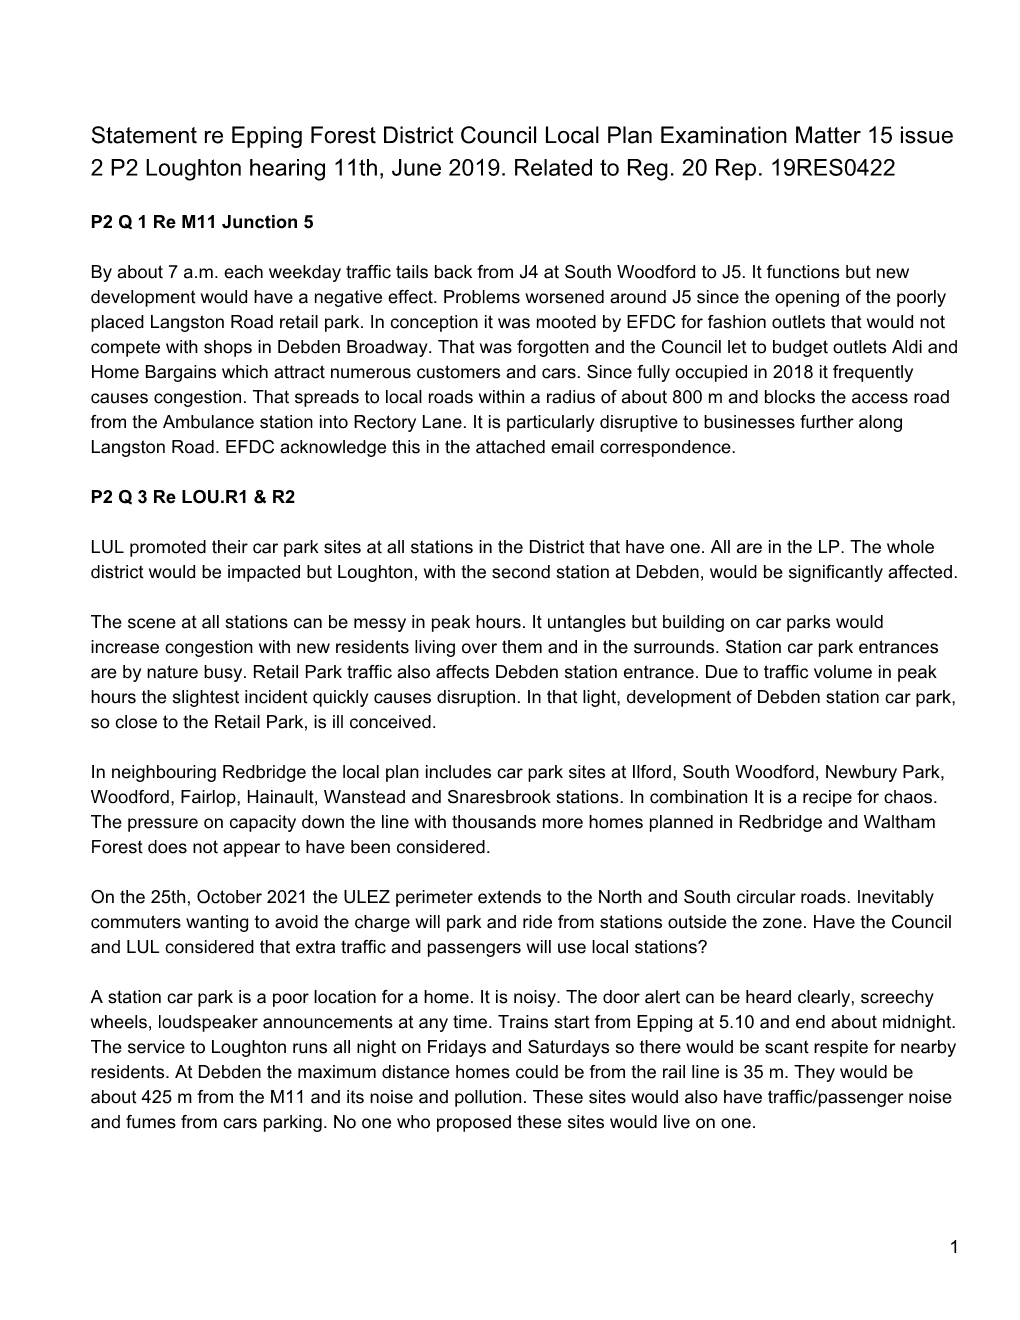 Statement Re Epping Forest District Council Local Plan Examination Matter 15 Issue 2 P2 Loughton Hearing 11Th, June 2019